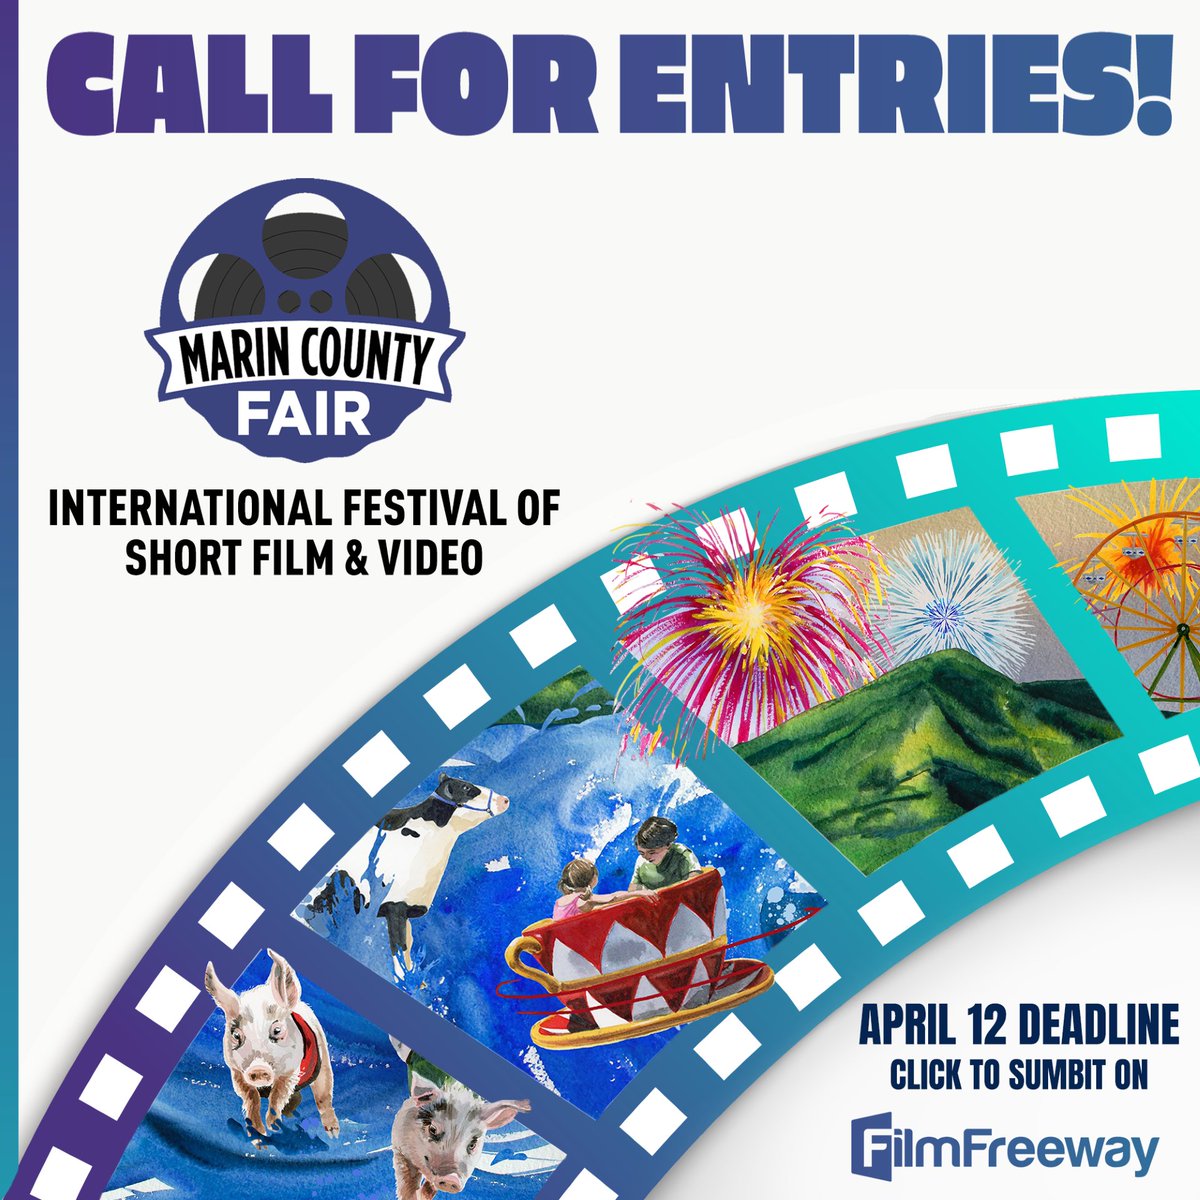 The Marin County Fair is proud to host the Marin County International Festival of Short Film & Video for the 50th year! Learn more and submit at filmfreeway.com/MarinCountyFai…